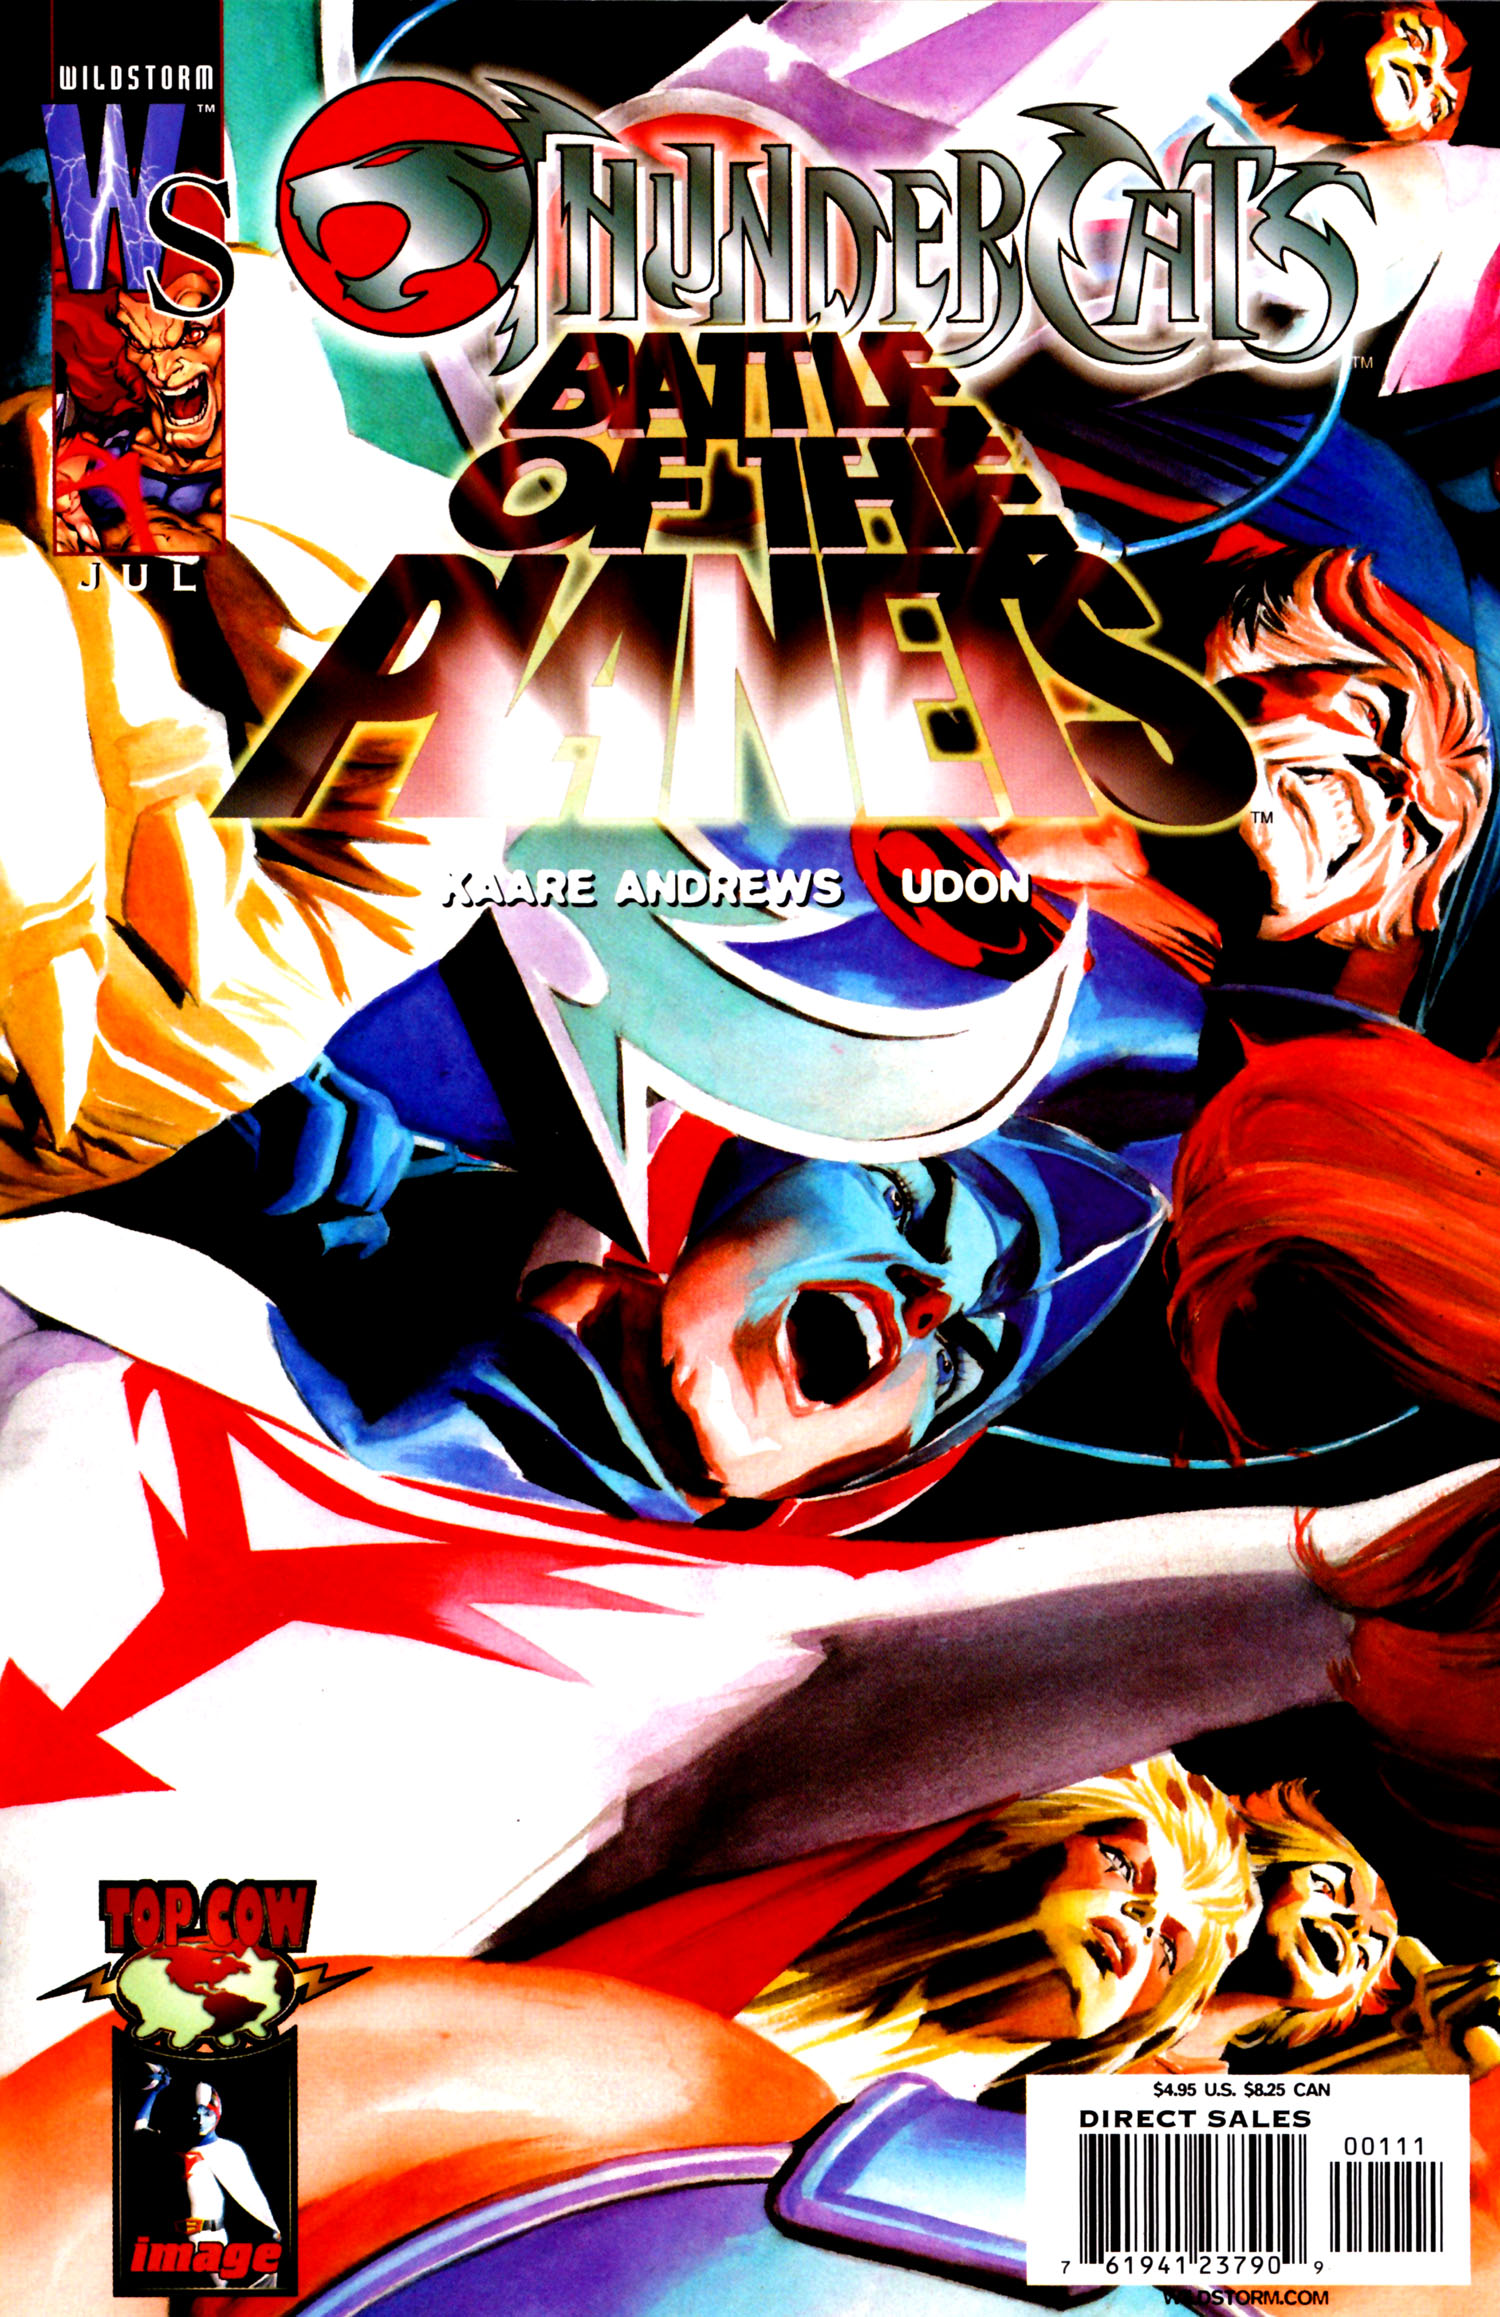 Read online ThunderCats/Battle of the Planets comic -  Issue # Full - 1